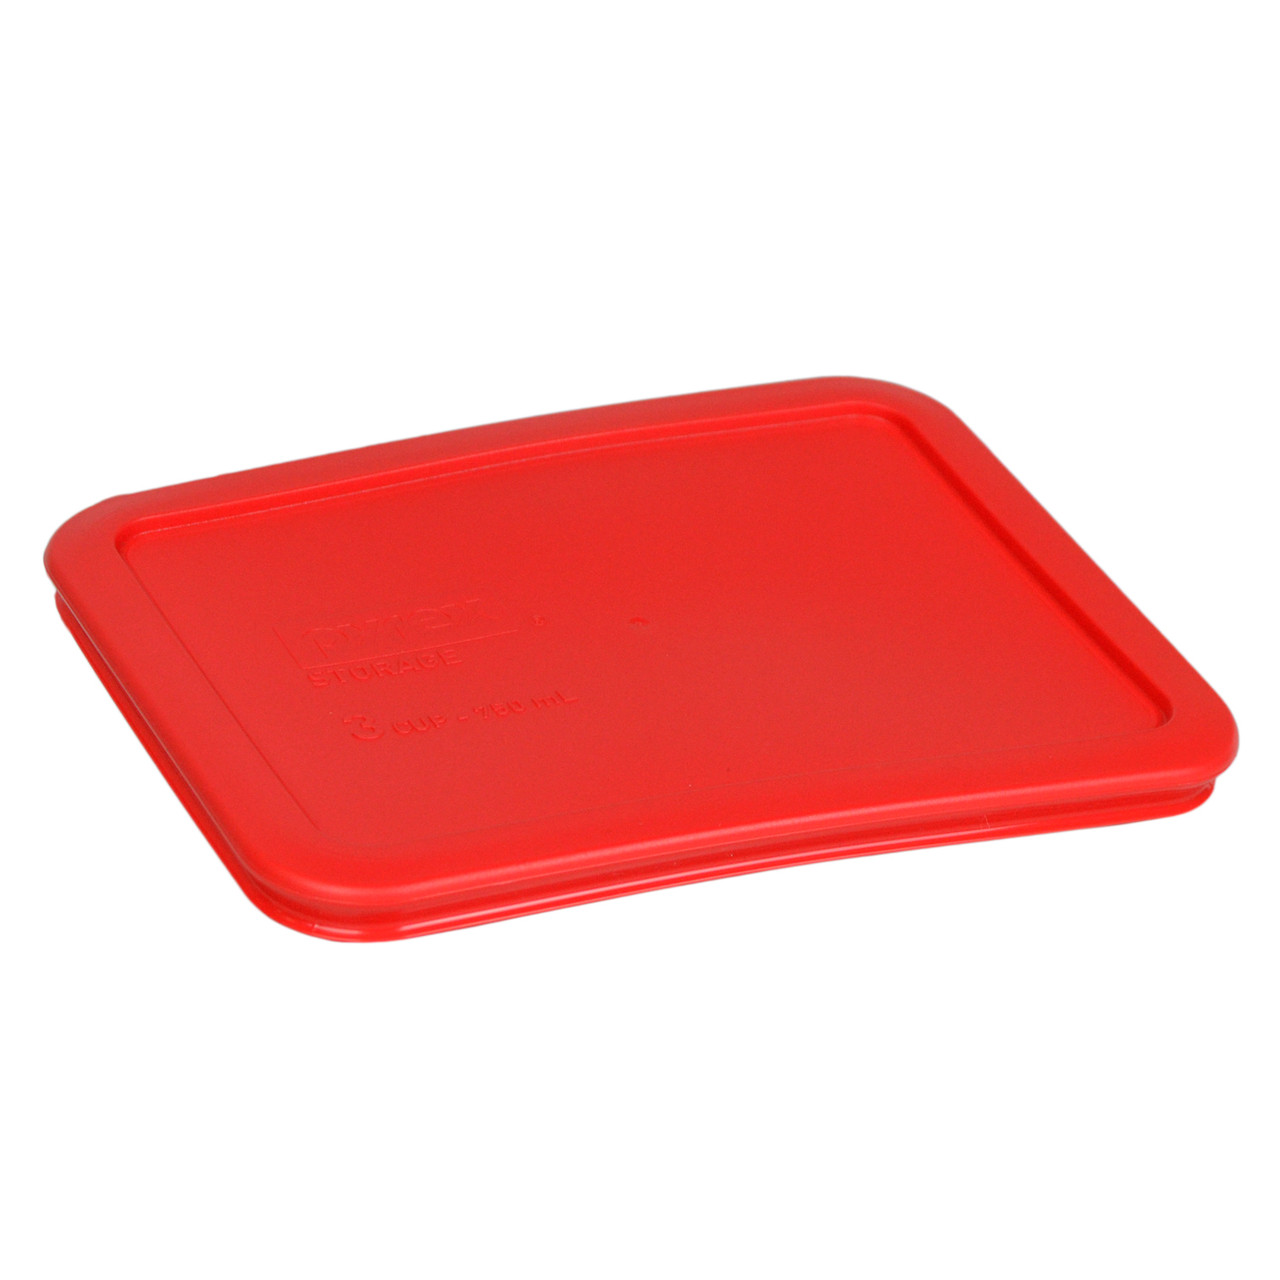  Pyrex 7210-PC 3-Cup Red Plastic Food Storage